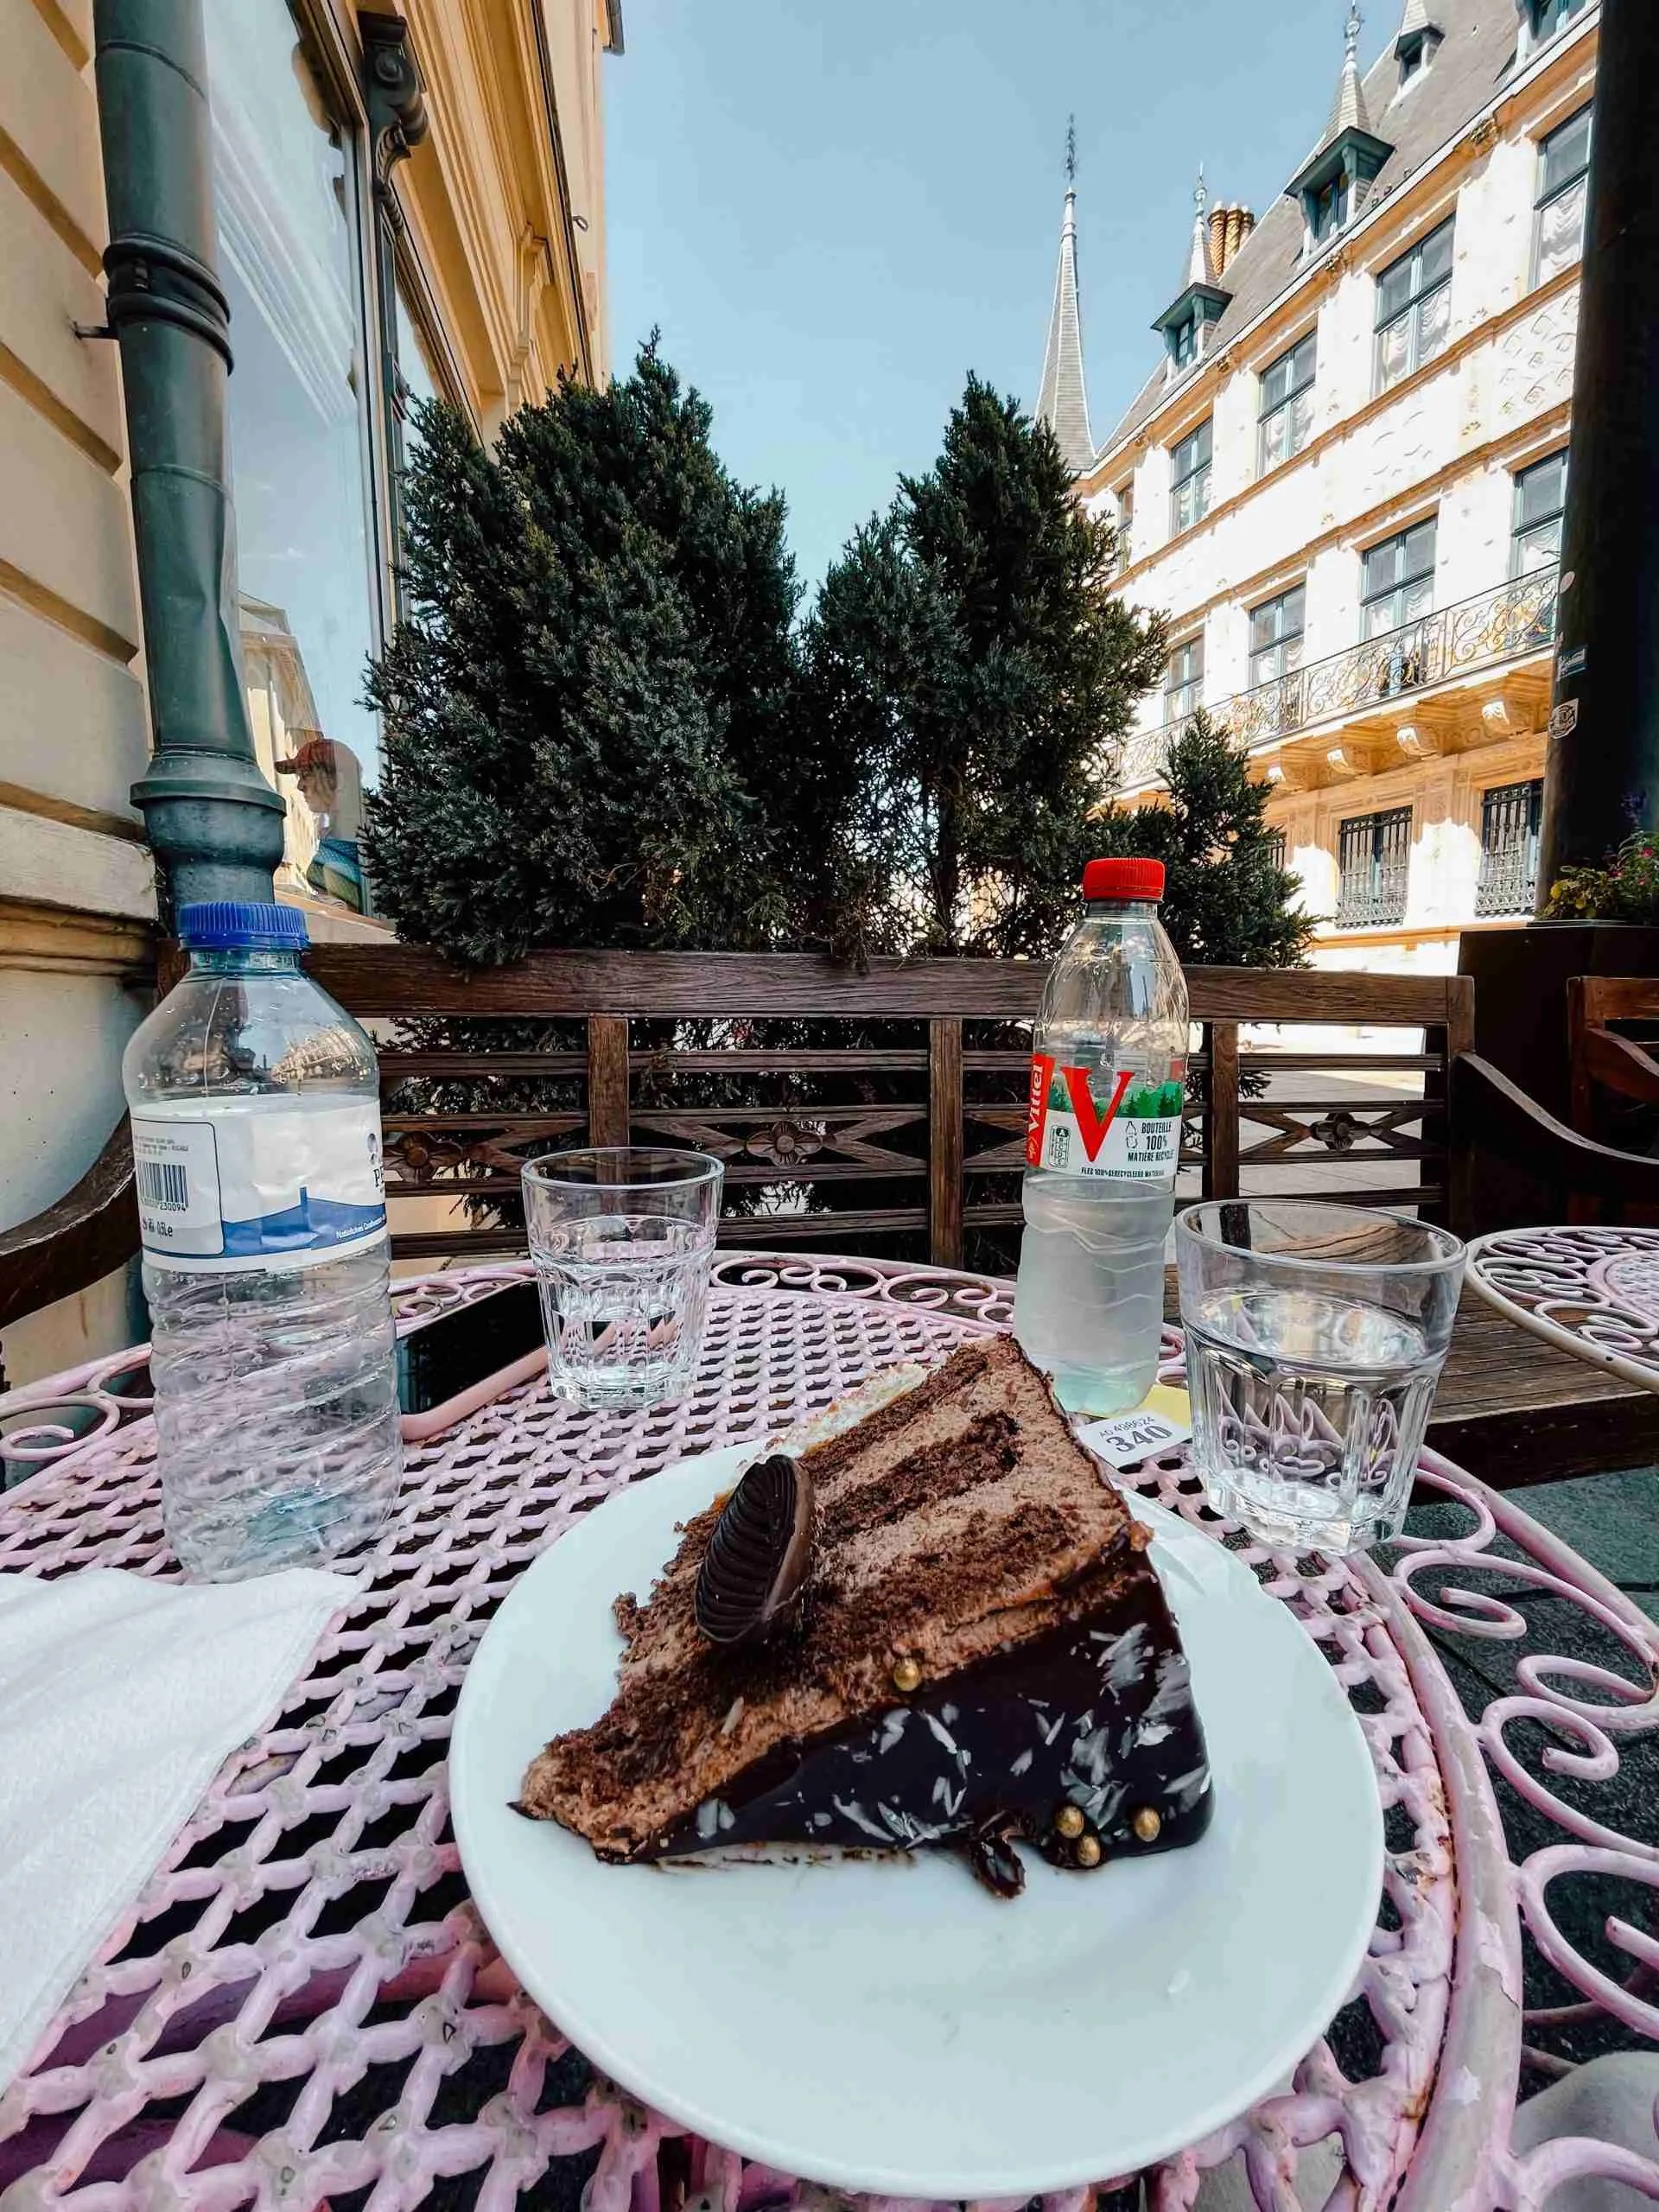 A slice of layered chocolate cake from the Chocolate House in Luxembourg 